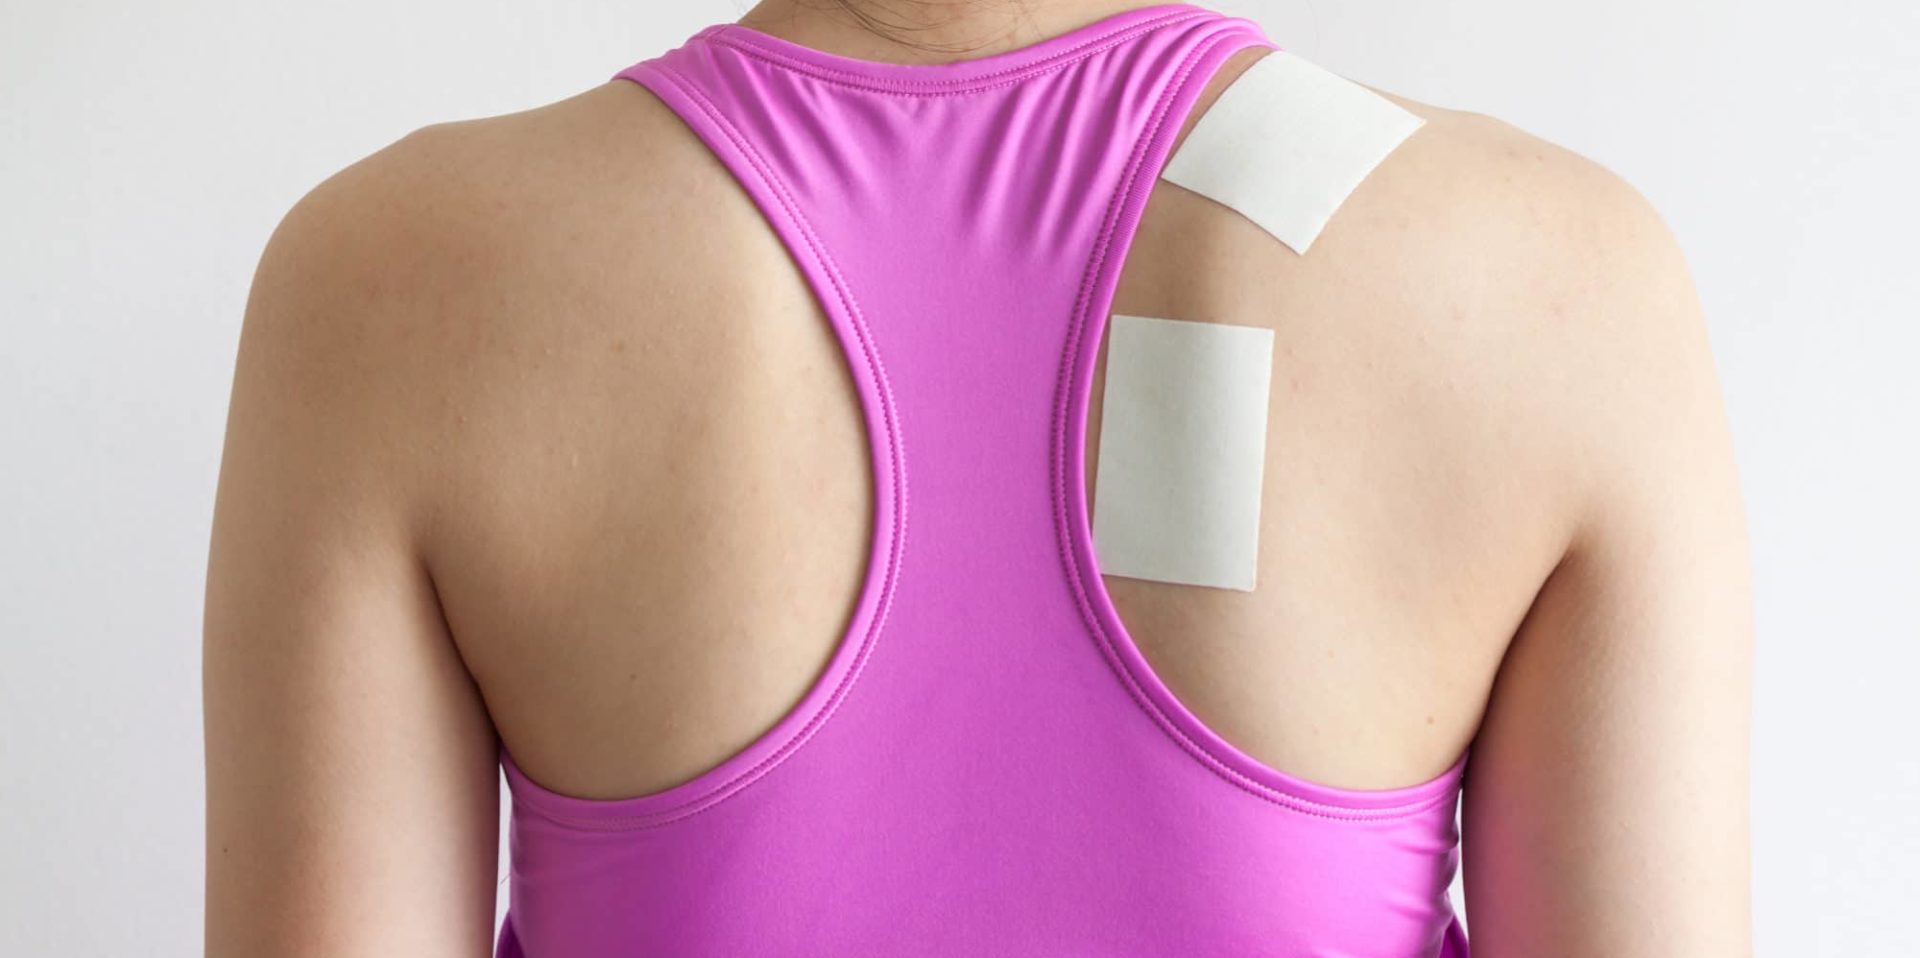 pain relief patches that work